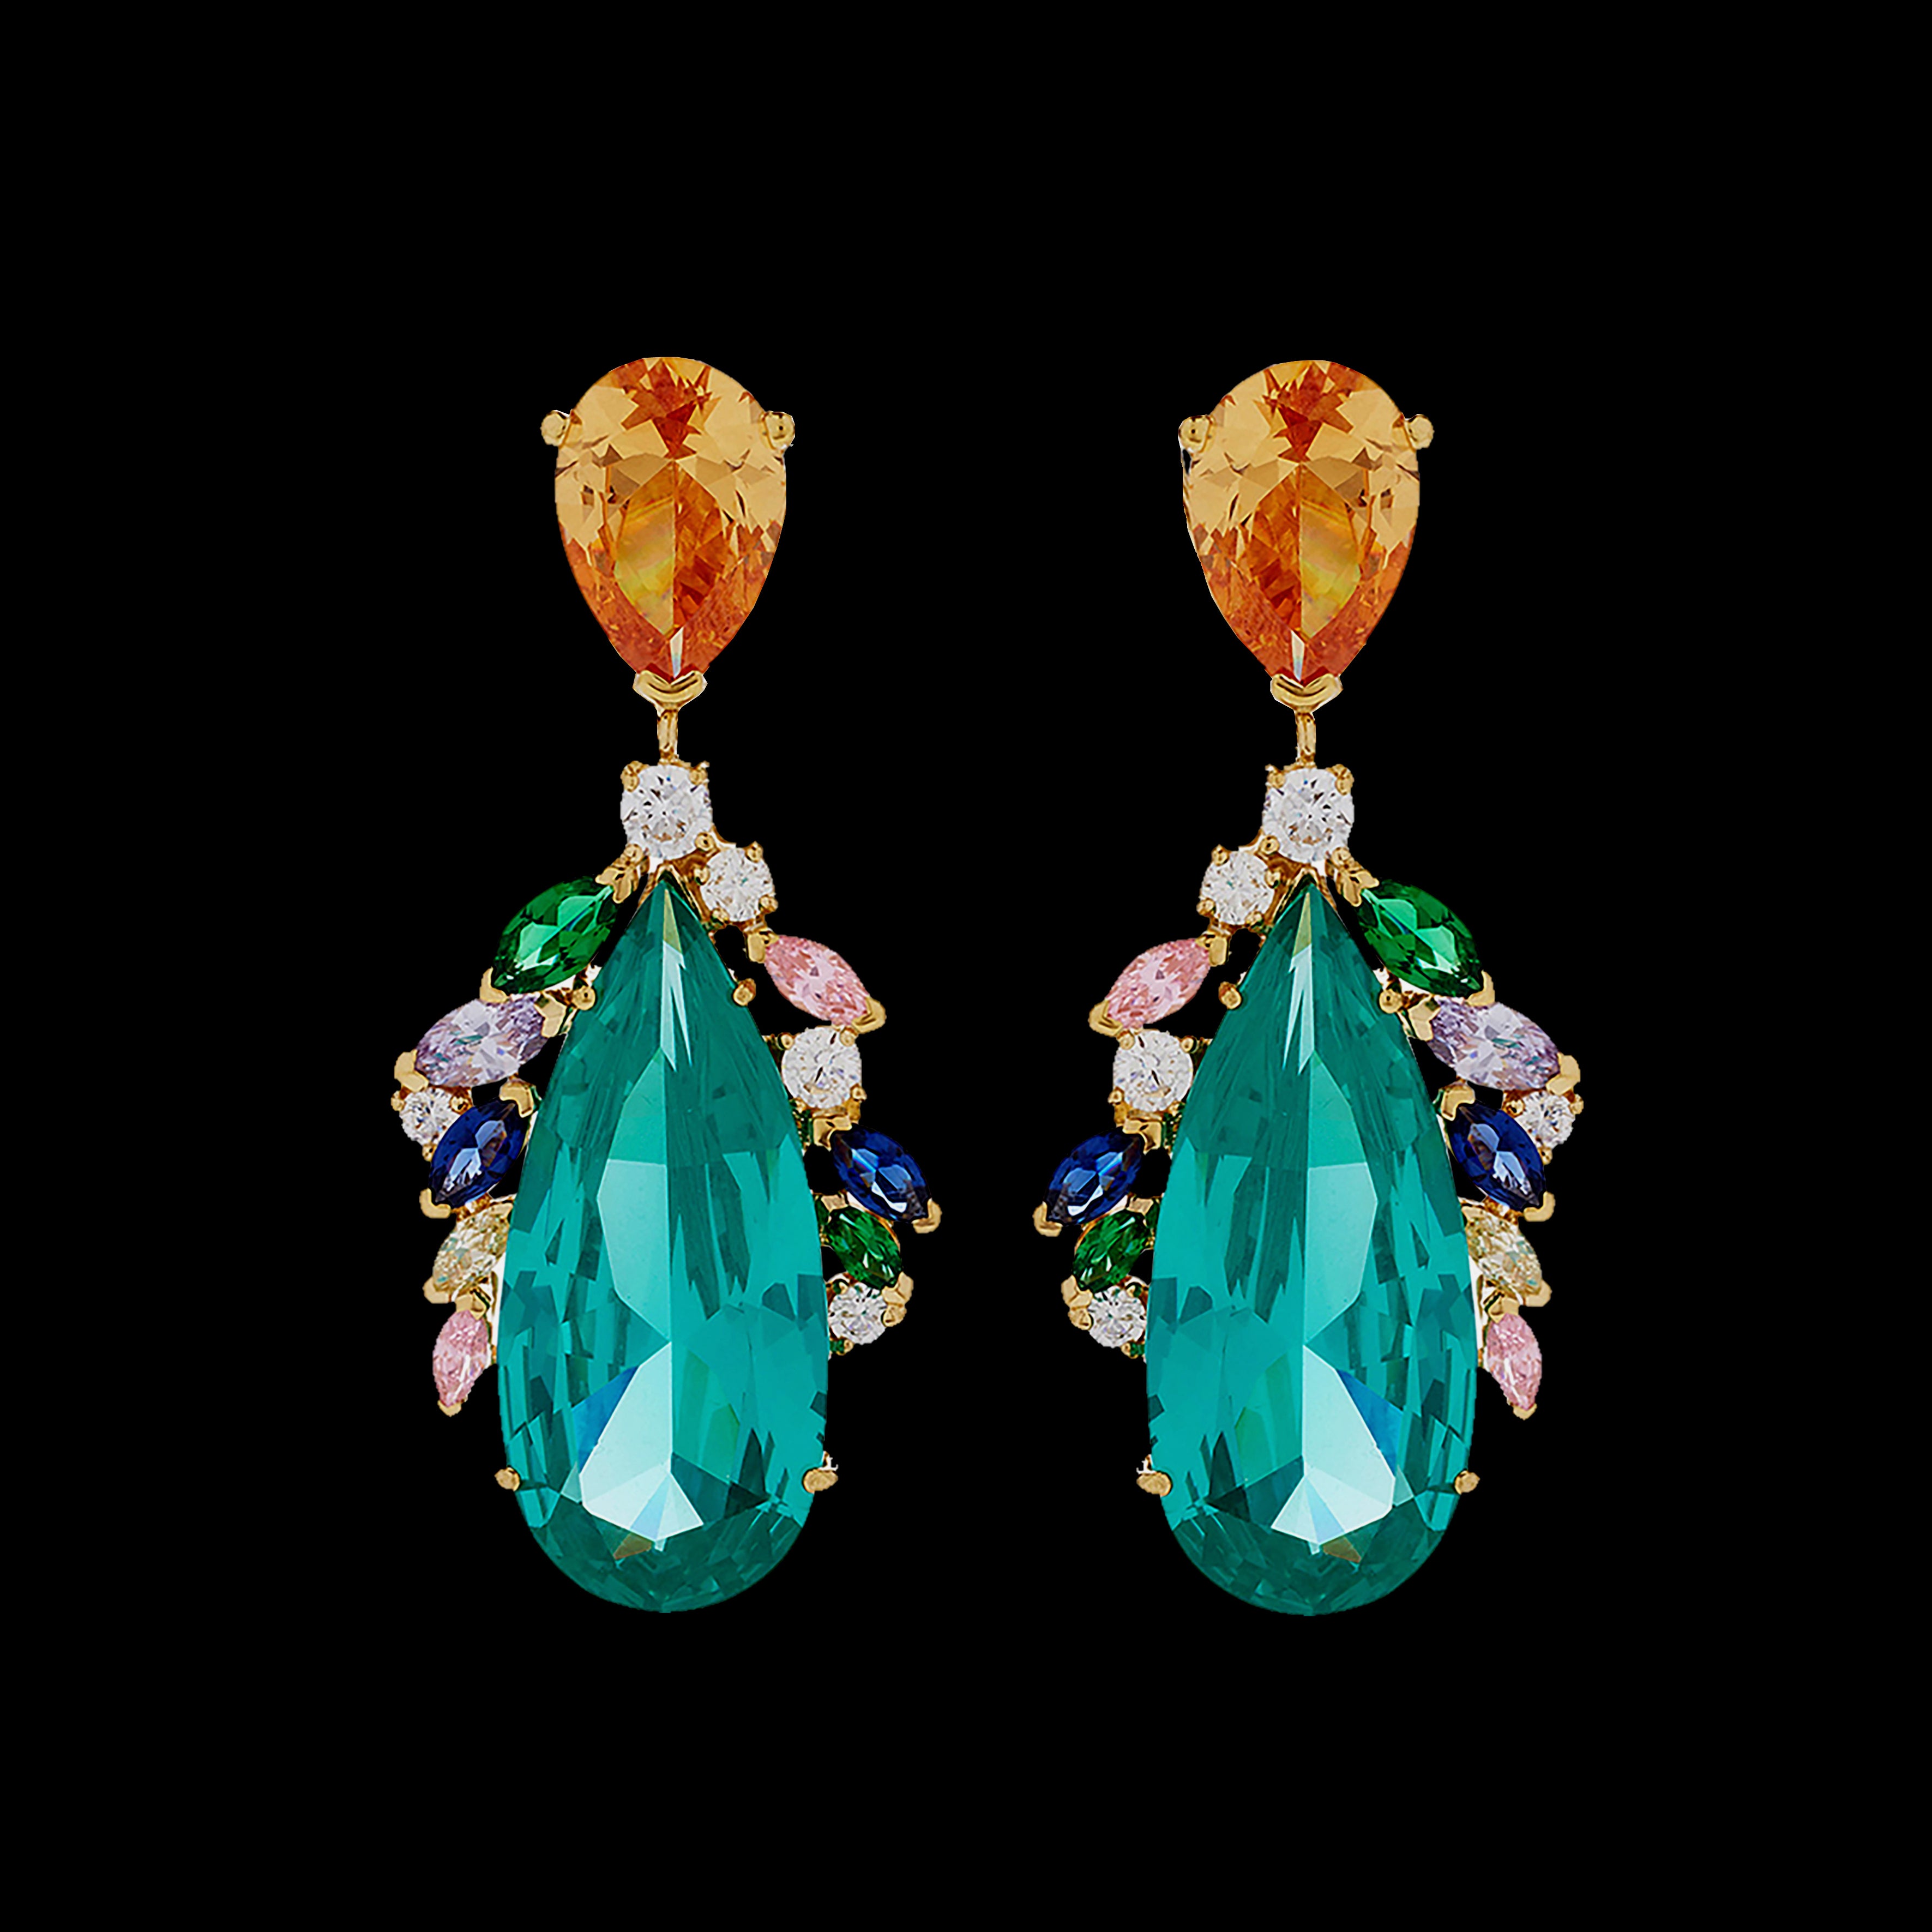 Peacock Paraiba Earrings, Earring, Anabela Chan Joaillerie - Fine jewelry with laboratory grown and created gemstones hand-crafted in the United Kingdom. Anabela Chan Joaillerie is the first fine jewellery brand in the world to champion laboratory-grown and created gemstones with high jewellery design, artisanal craftsmanship and a focus on ethical and sustainable innovations.